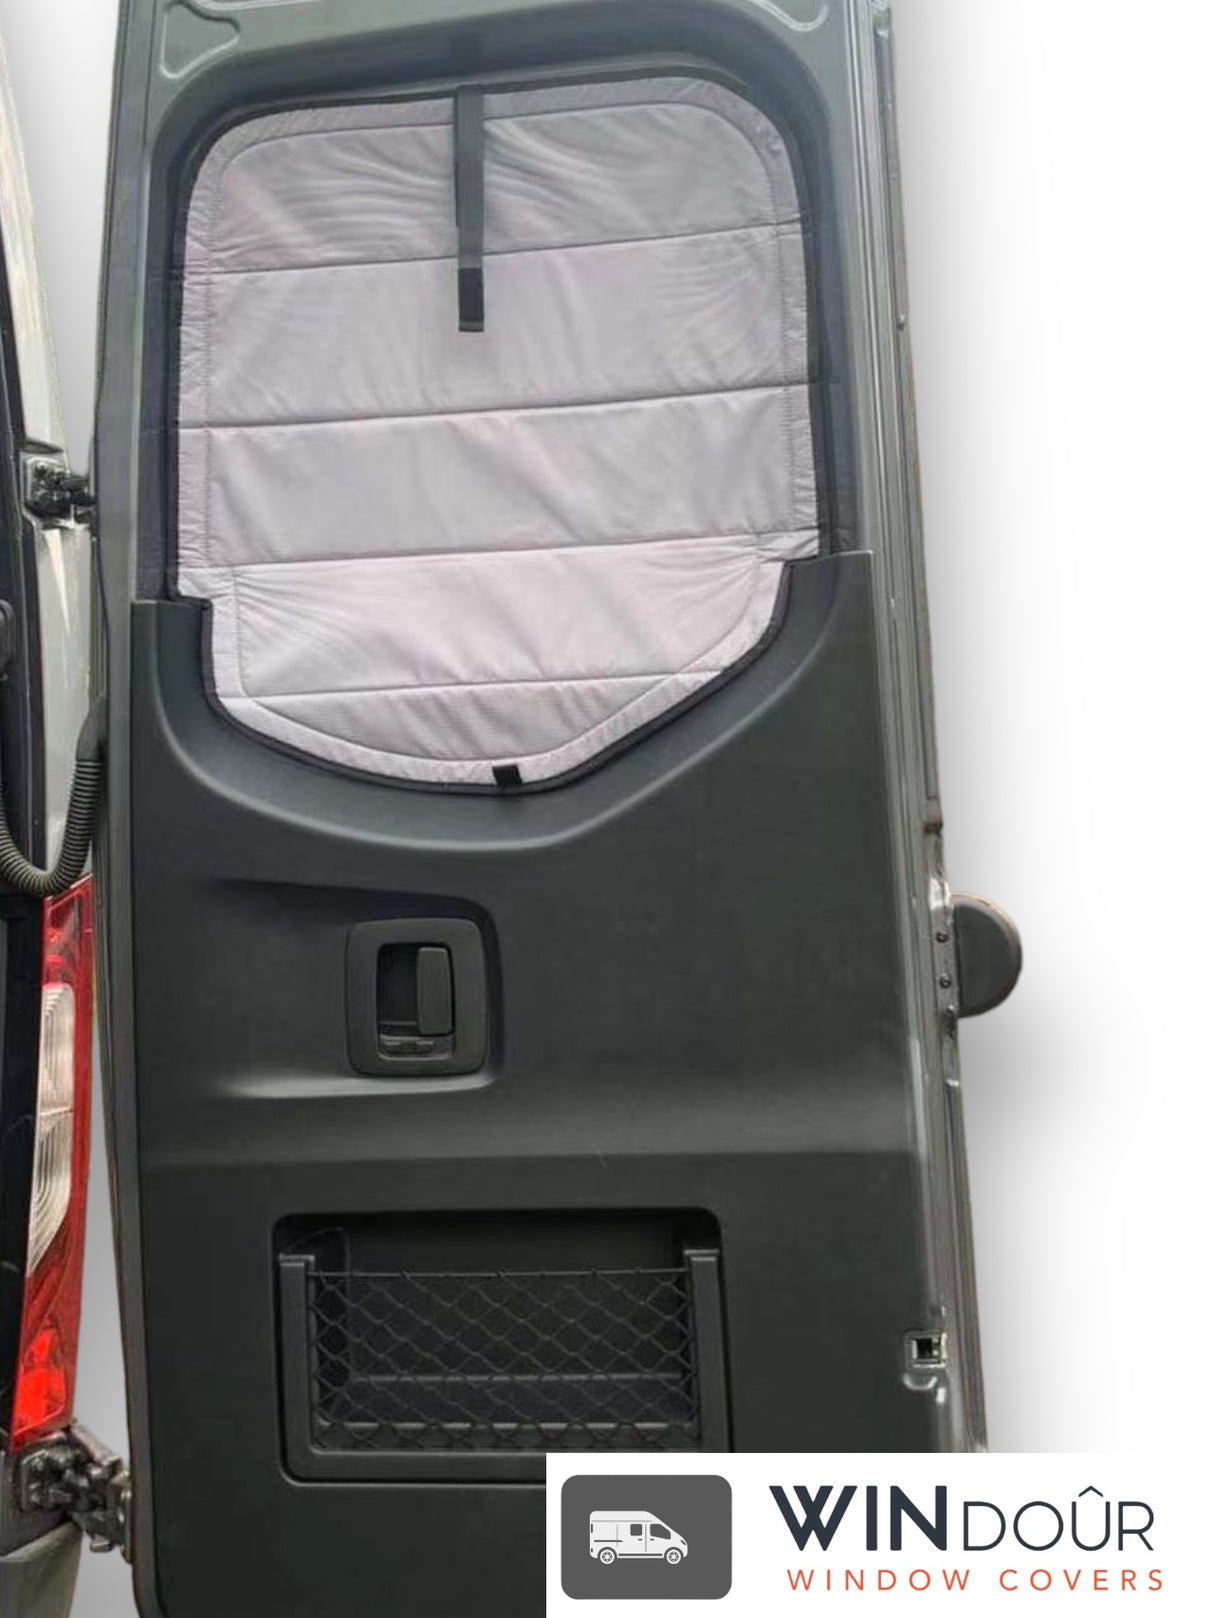 WINdoûr insulated￼ Blackout Covers with Large Net Storage Pocket. Window Covers for Sprinter Rear Doors